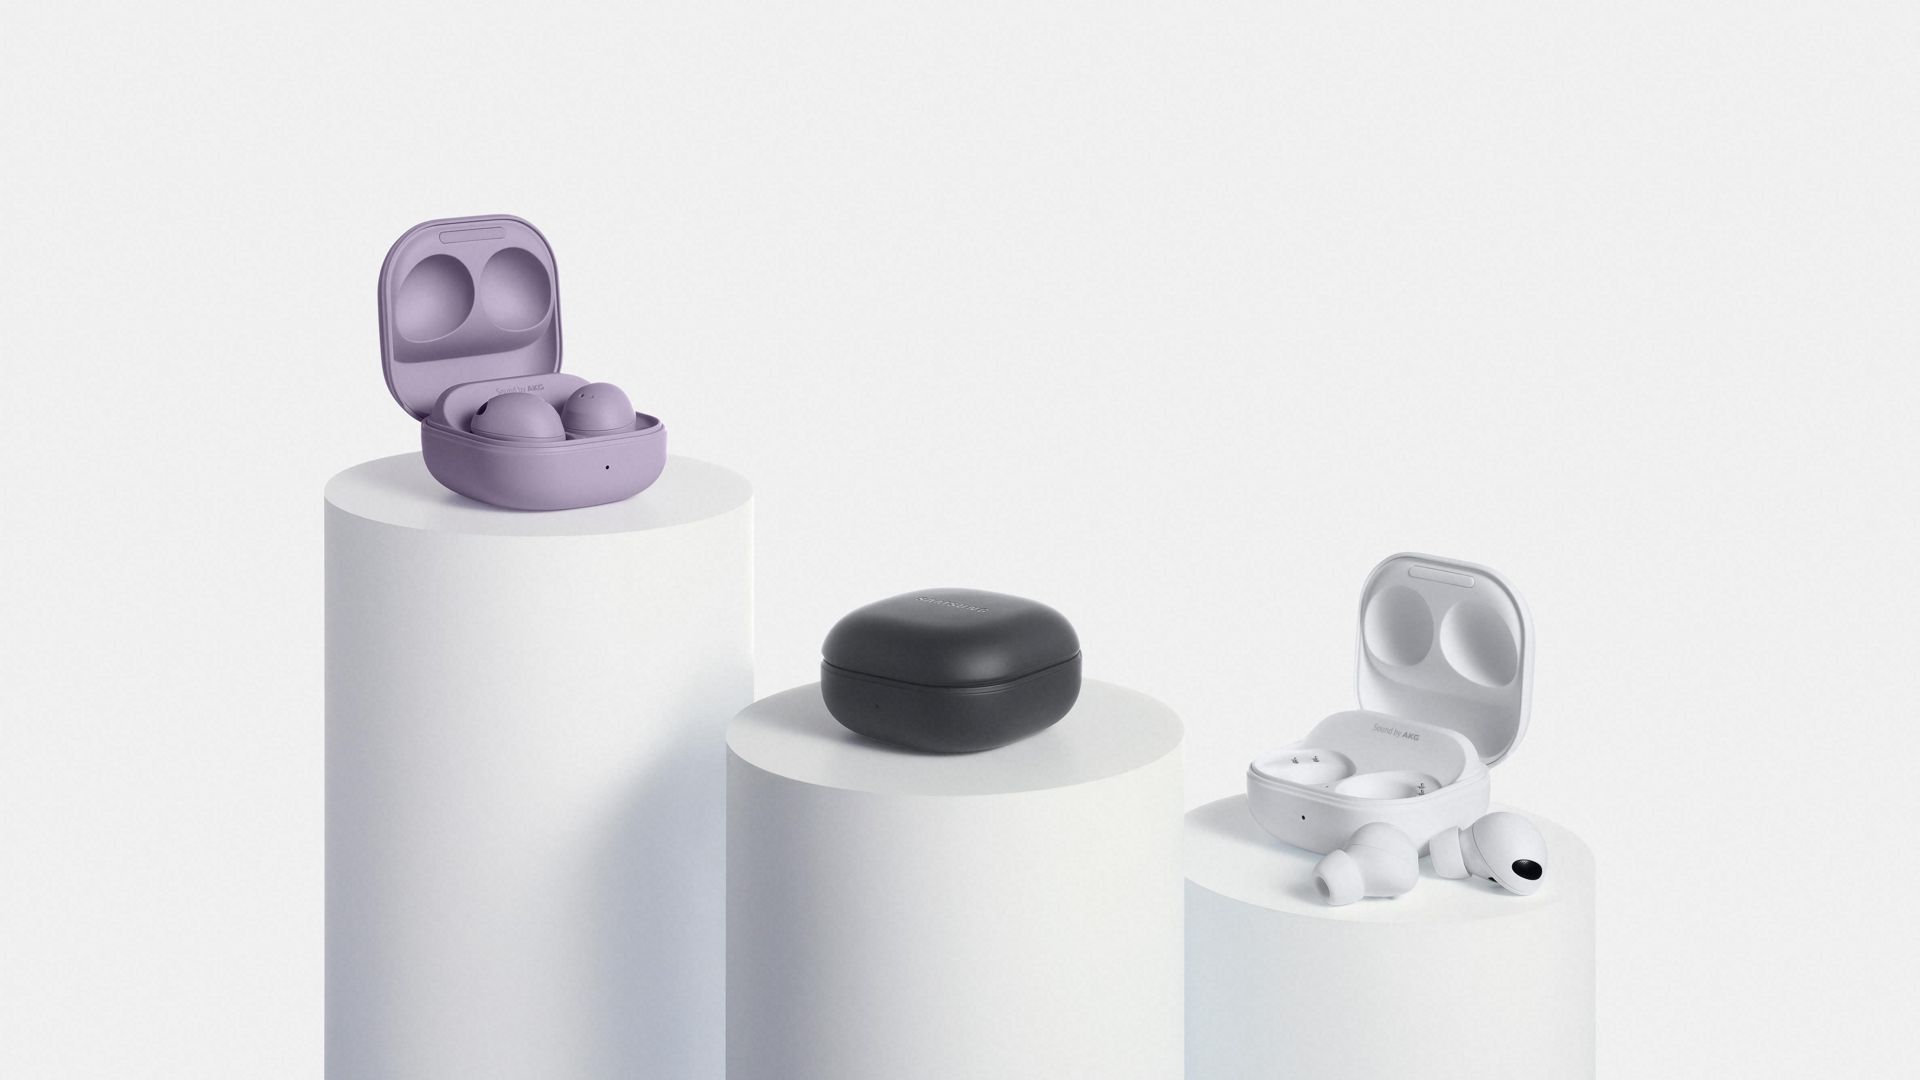 Galaxy Buds 2 Pro in three colors